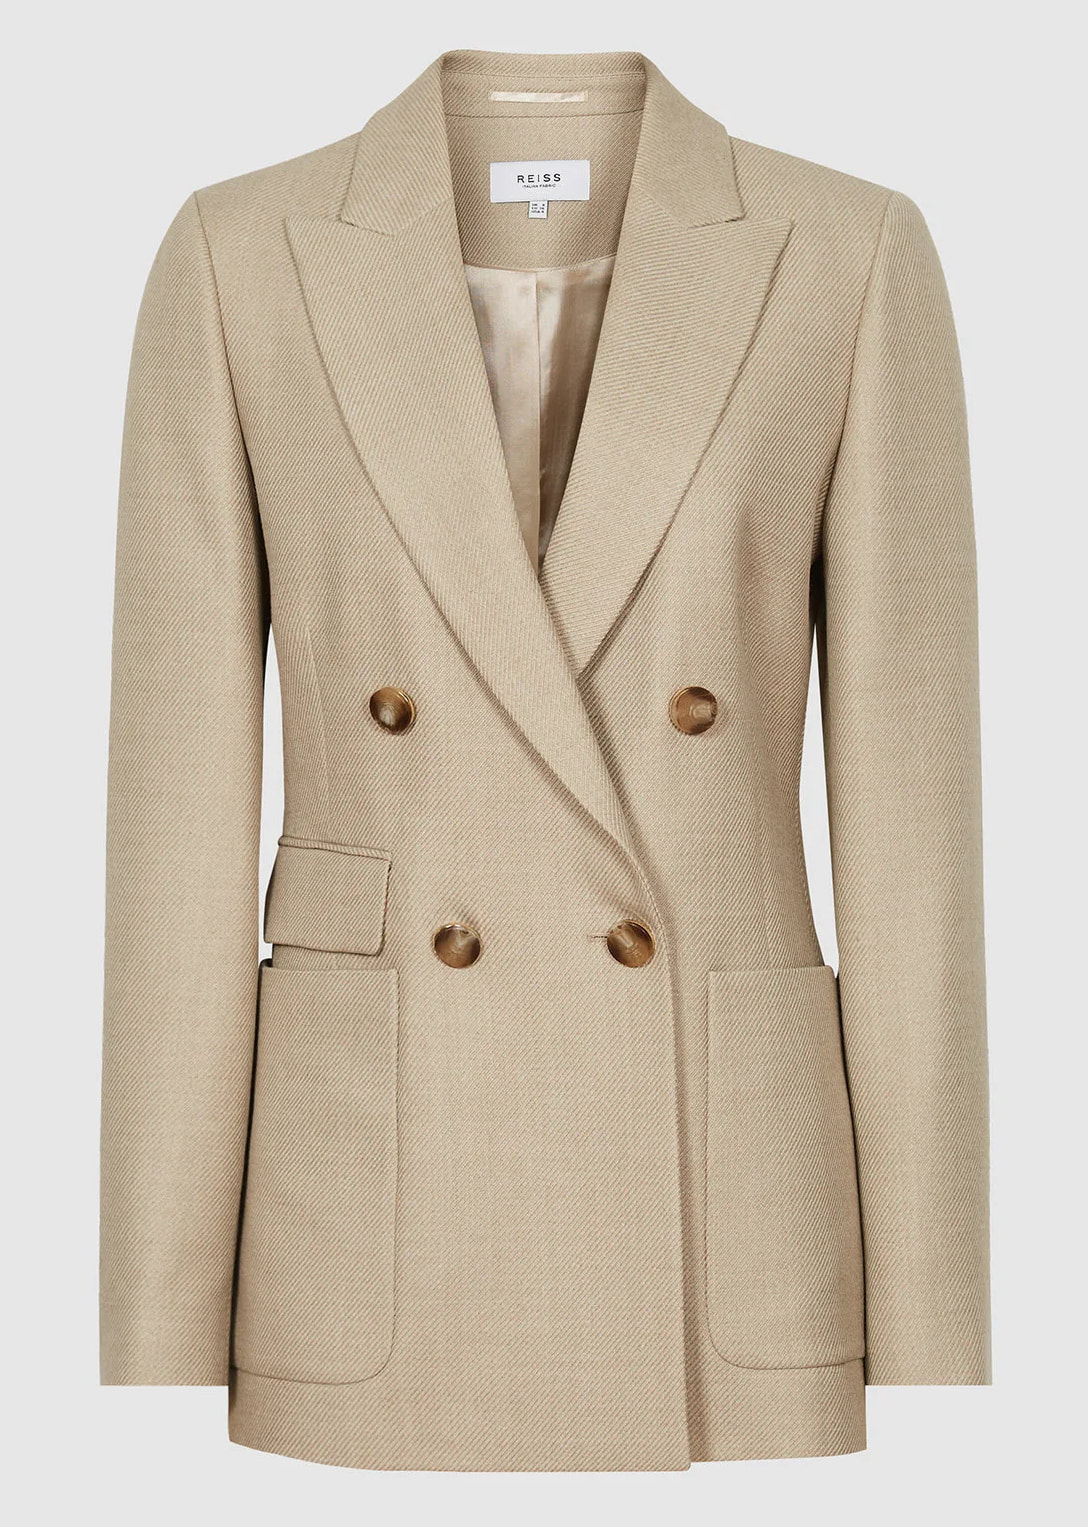 Reiss 'Larsson' double-breasted Twill blazer in neutral